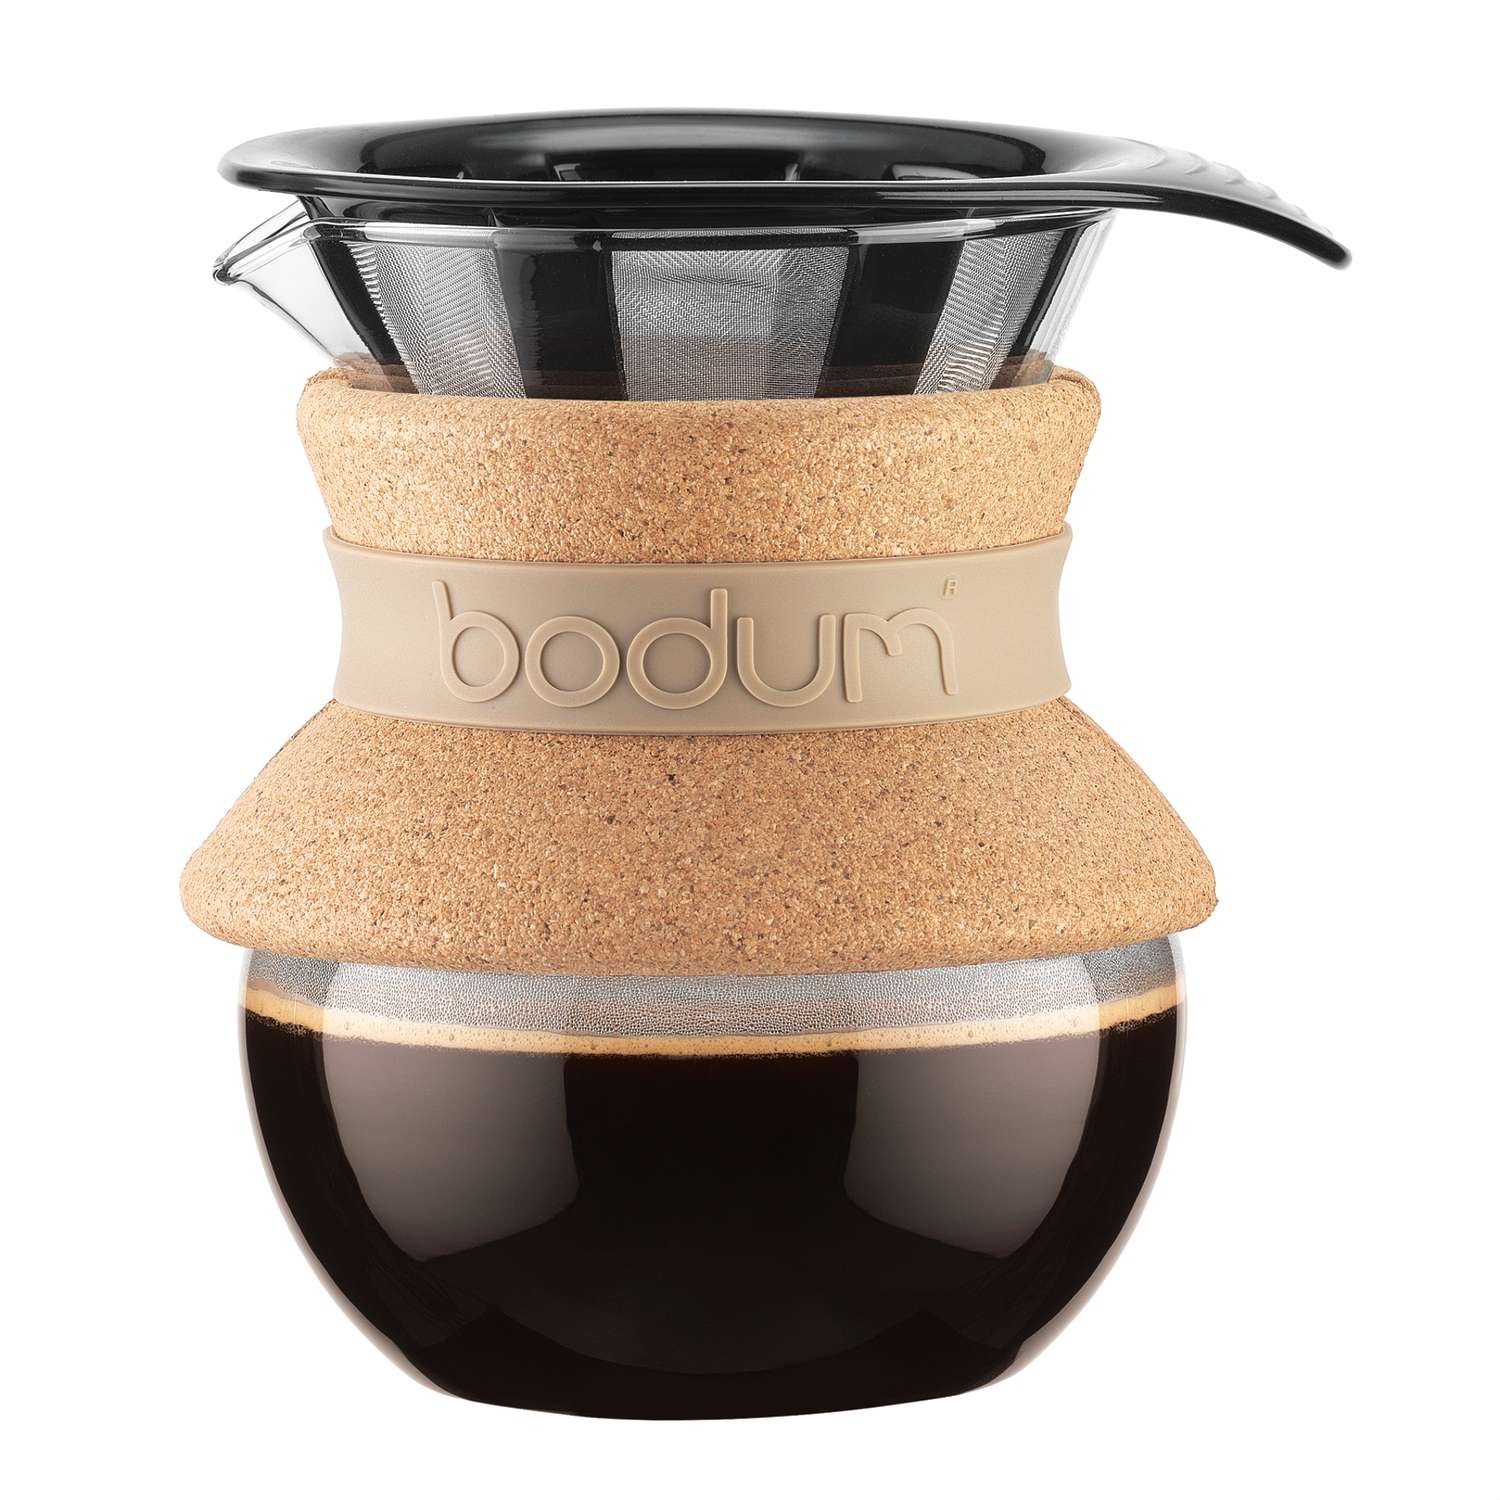 Bodum Pour Over 17 oz Brown Pour-Over Coffee Brewer - Ace Hardware